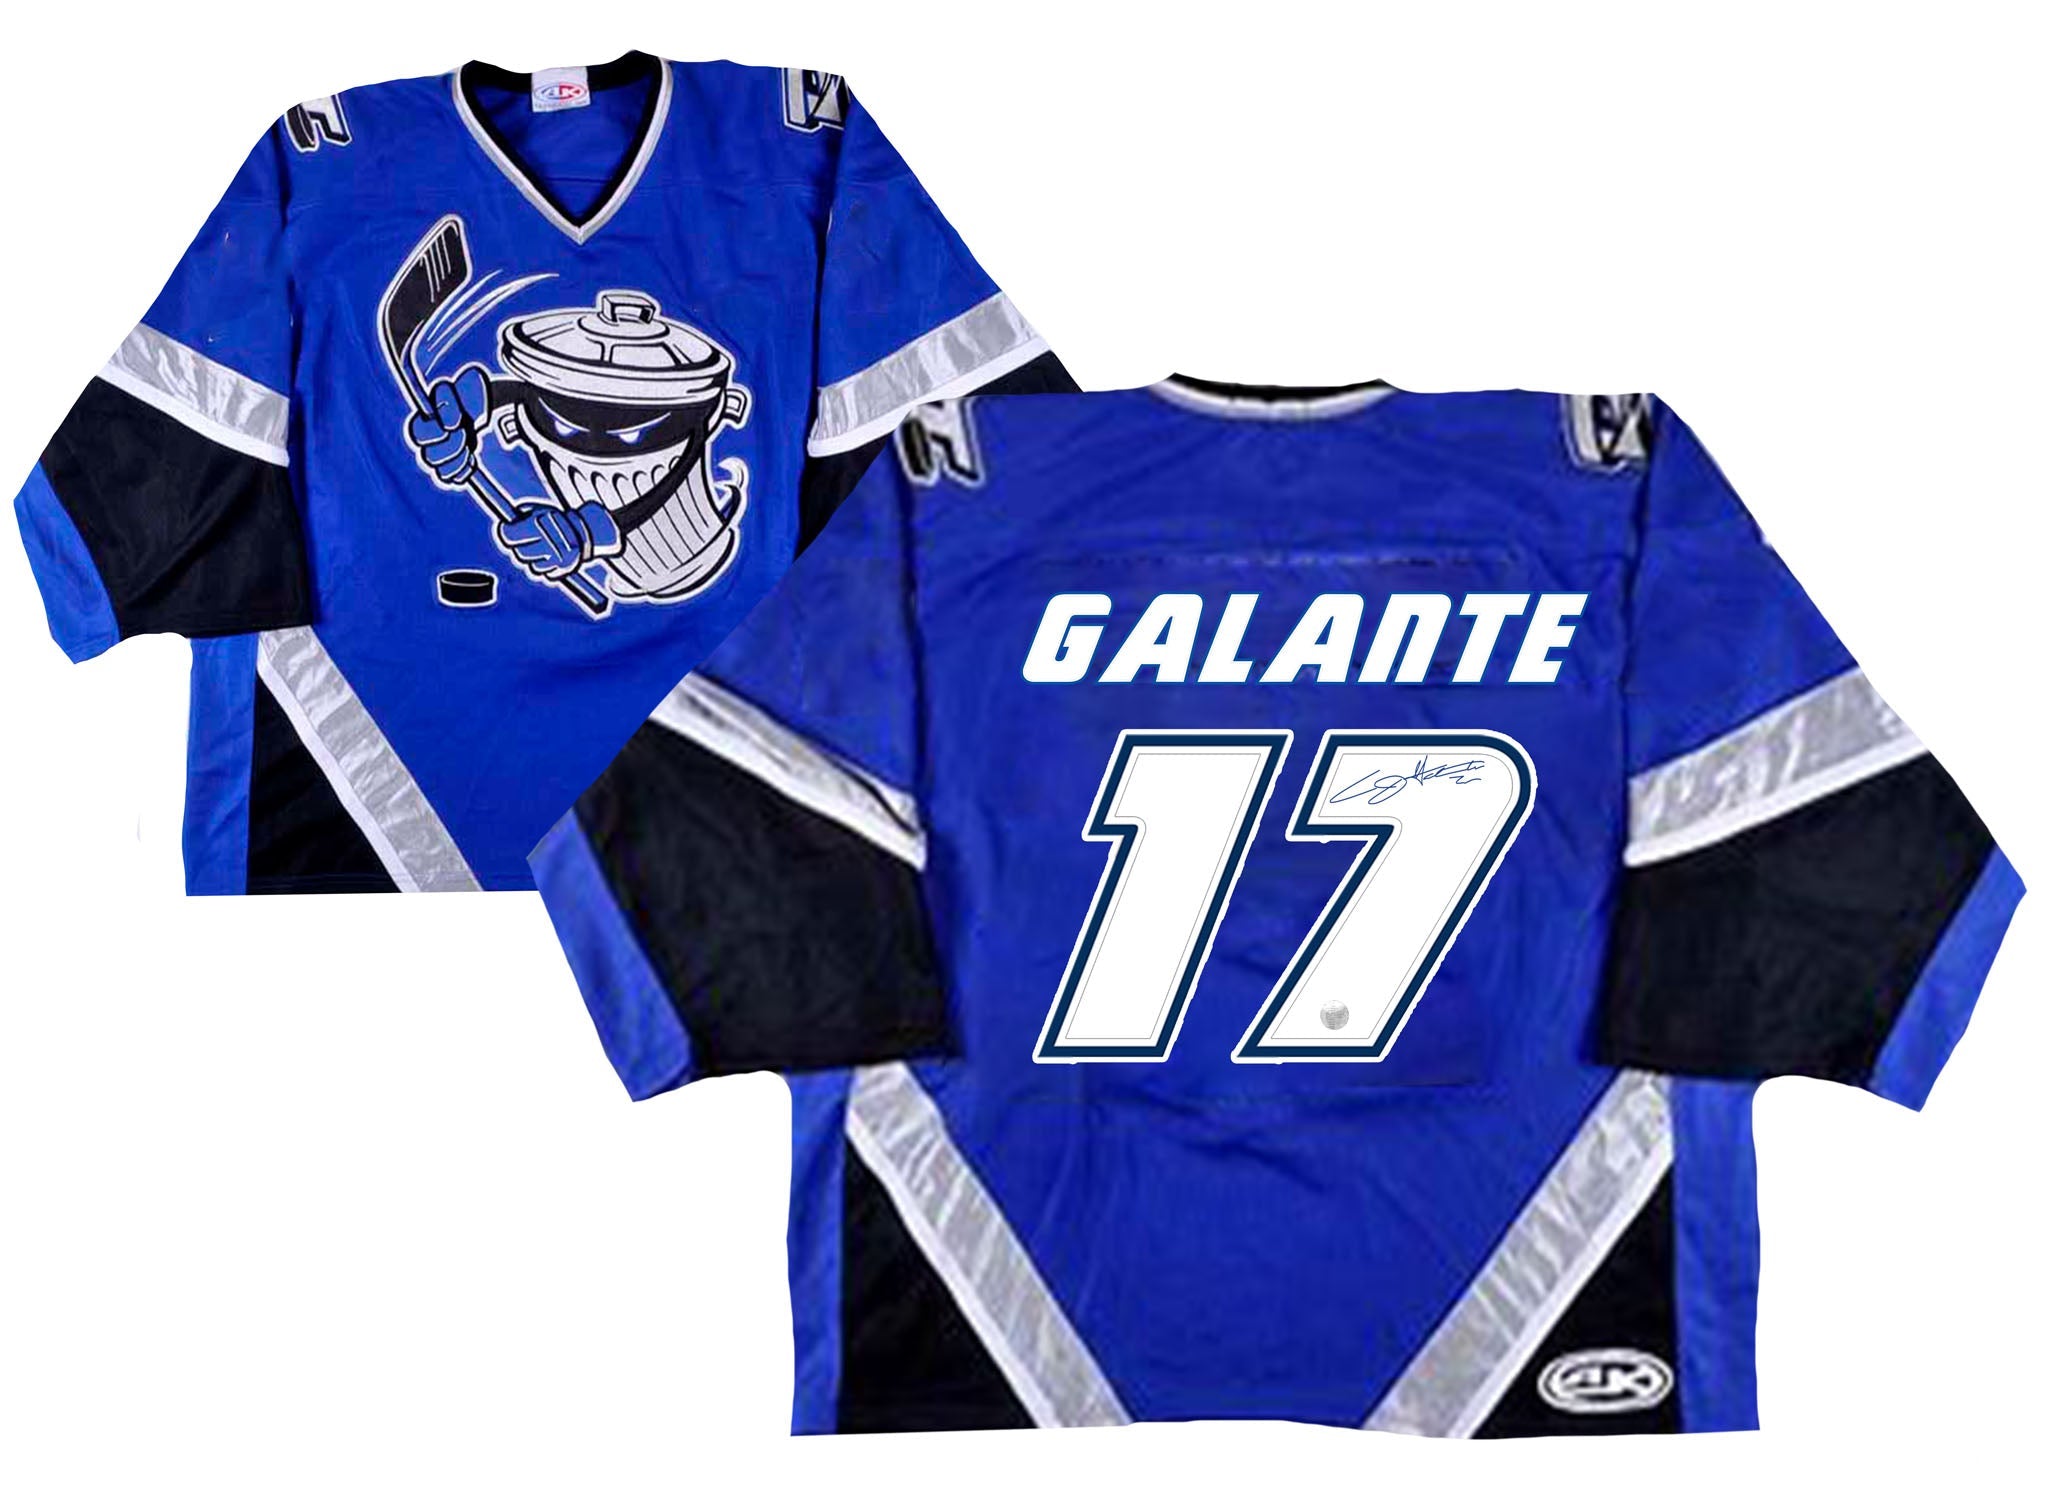 Verbero Hockey - Danbury Trashers jerseys are flying! ✈️ Be sure to grab  yours ASAP to avoid missing the chance! Remember - AJ Galante has given you  the option to customize an